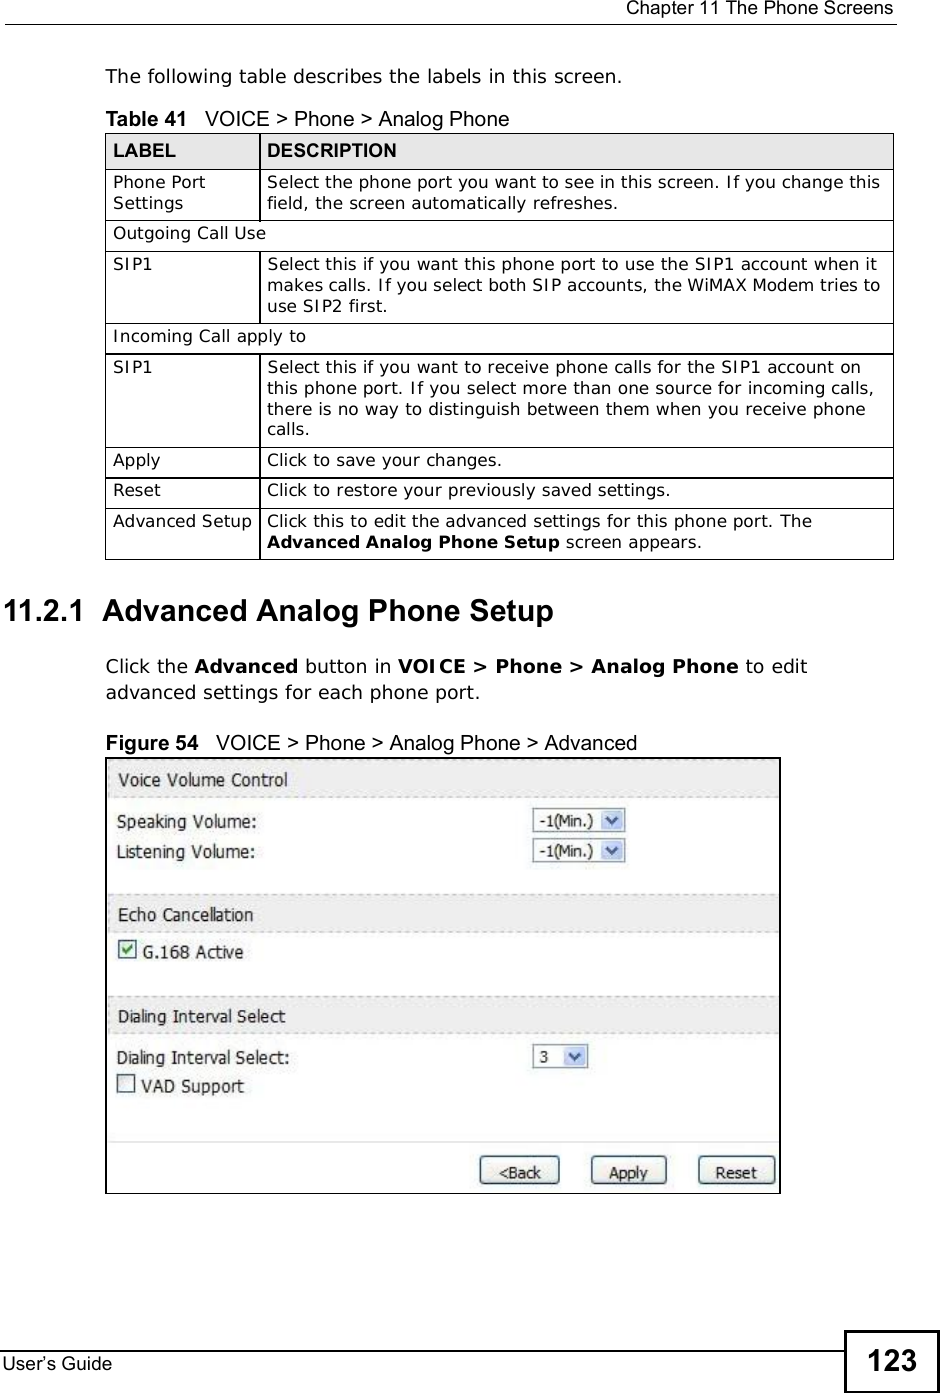  Chapter 11The Phone ScreensUser s Guide 123The following table describes the labels in this screen.11.2.1  Advanced Analog Phone SetupClick the Advanced button in VOICE &gt; Phone &gt; Analog Phone to edit advanced settings for each phone port.Figure 54   VOICE &gt; Phone &gt; Analog Phone &gt; AdvancedTable 41   VOICE &gt; Phone &gt; Analog PhoneLABEL DESCRIPTIONPhone Port Settings Select the phone port you want to see in this screen. If you change this field, the screen automatically refreshes.Outgoing Call UseSIP1Select this if you want this phone port to use the SIP1 account when it makes calls. If you select both SIP accounts, the WiMAX Modem tries to use SIP2 first.Incoming Call apply toSIP1Select this if you want to receive phone calls for the SIP1 account on this phone port. If you select more than one source for incoming calls, there is no way to distinguish between them when you receive phone calls.Apply Click to save your changes.Reset Click to restore your previously saved settings.Advanced Setup Click this to edit the advanced settings for this phone port. The Advanced Analog Phone Setup screen appears.